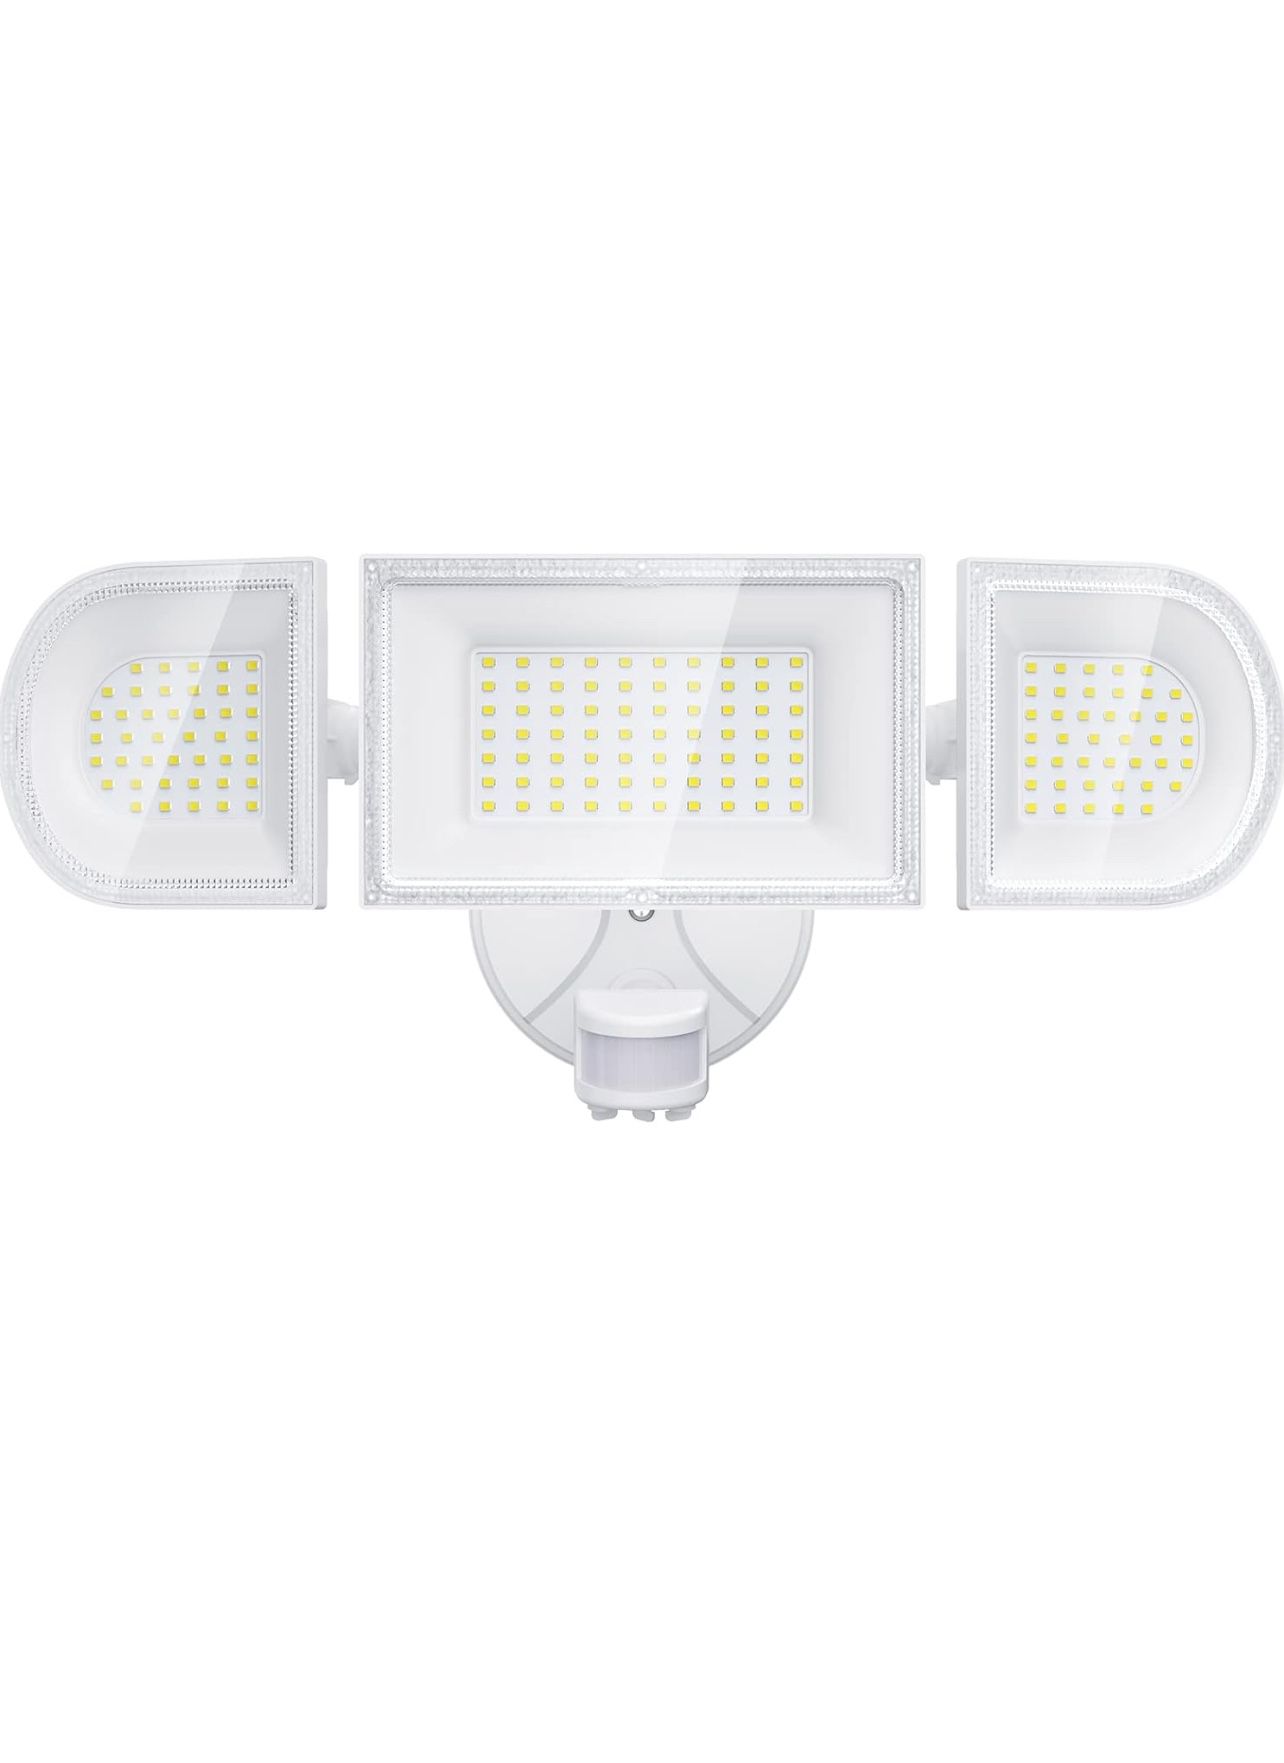 Flood Lights Motion Detection (New in Box)